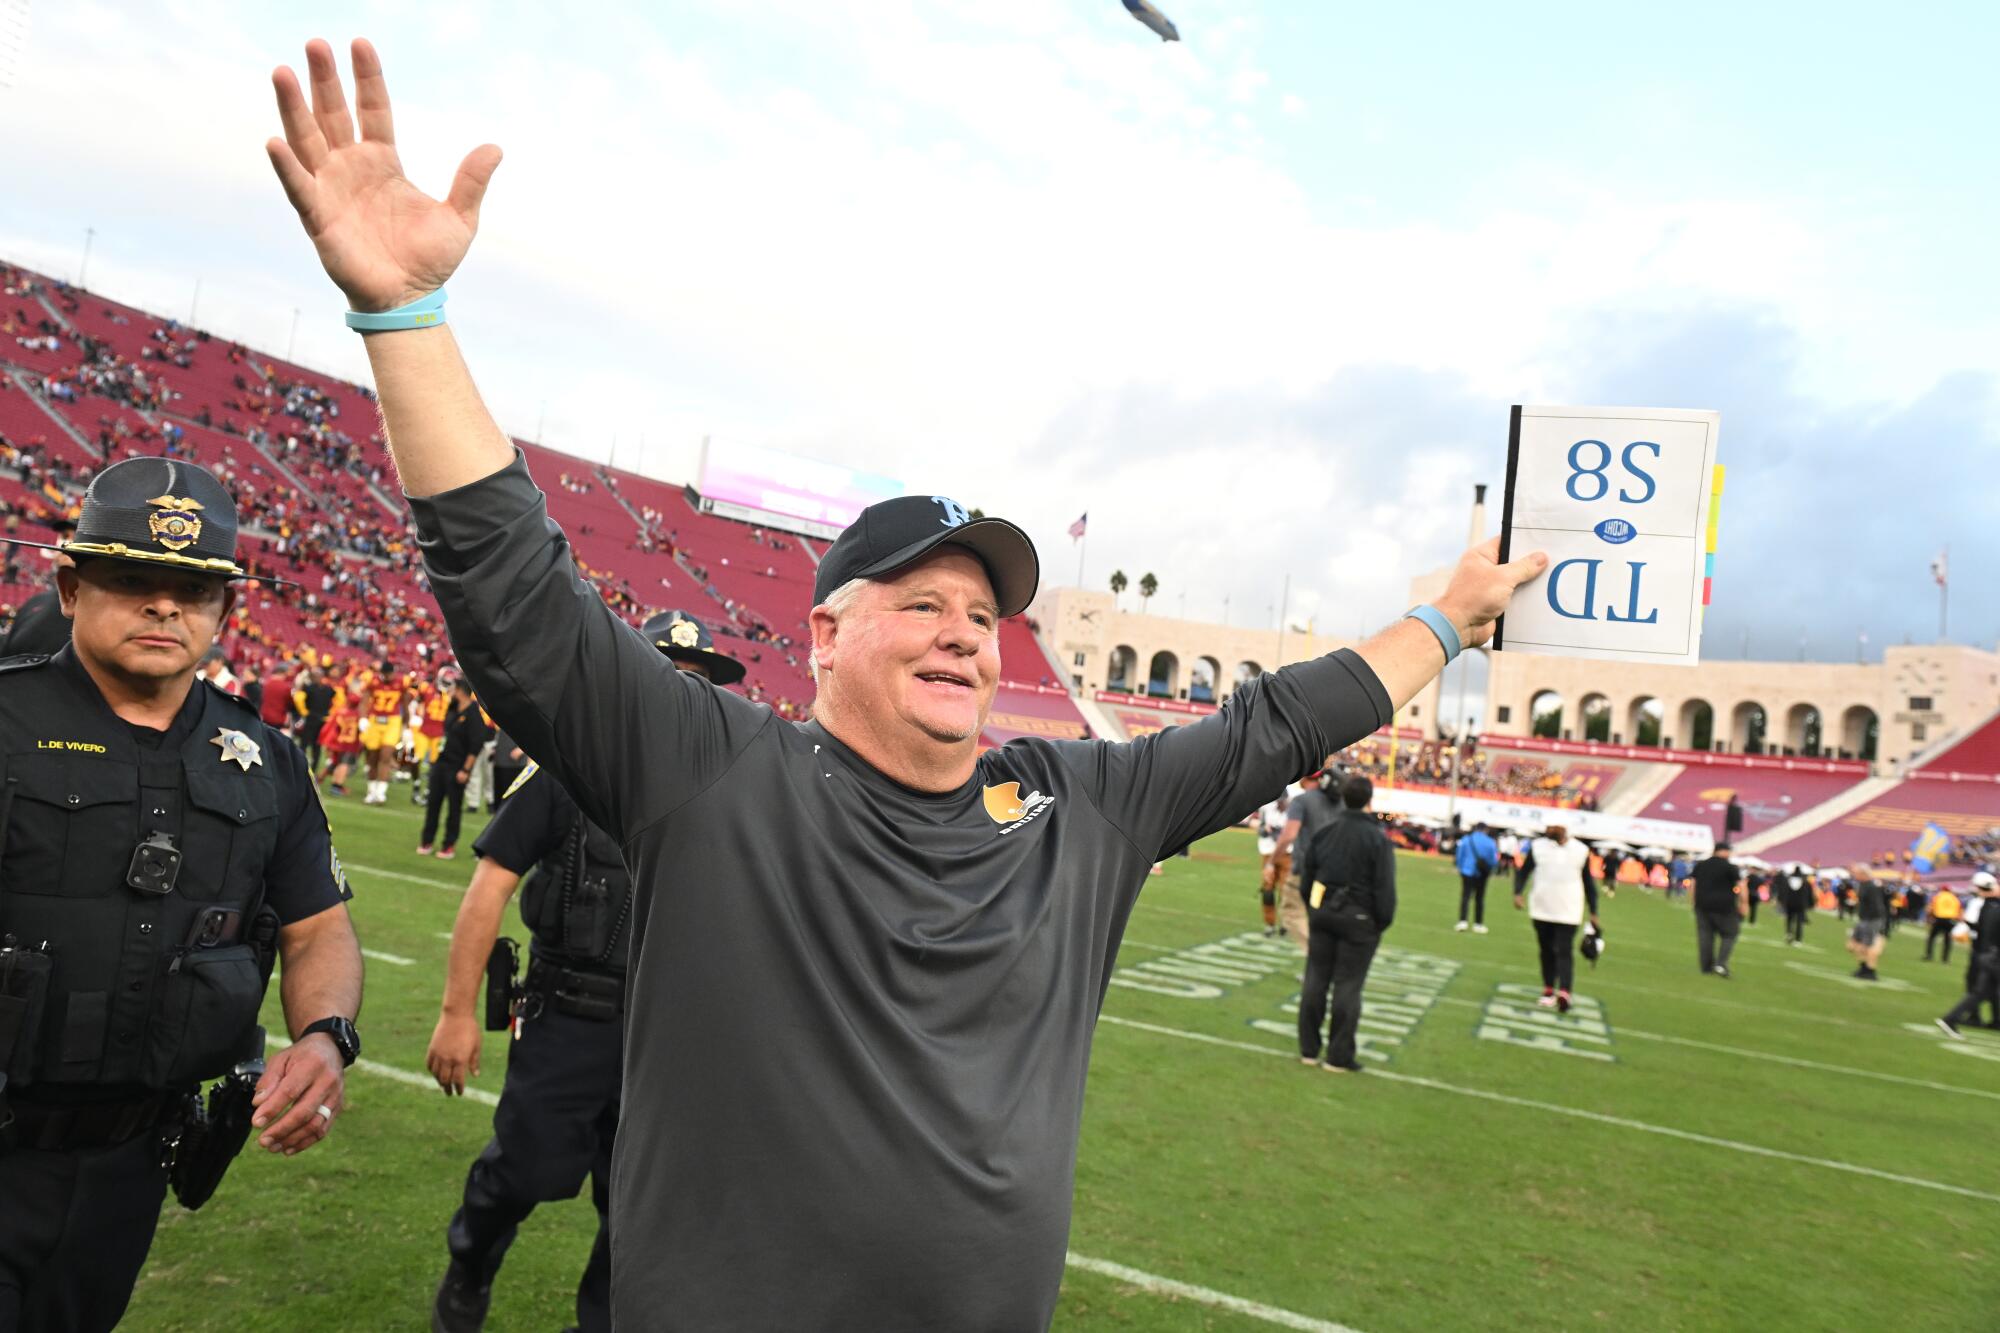 UCLA coach Chip Kelly celebrates after a 38-20 victory over USC at the Coliseum on Saturday.